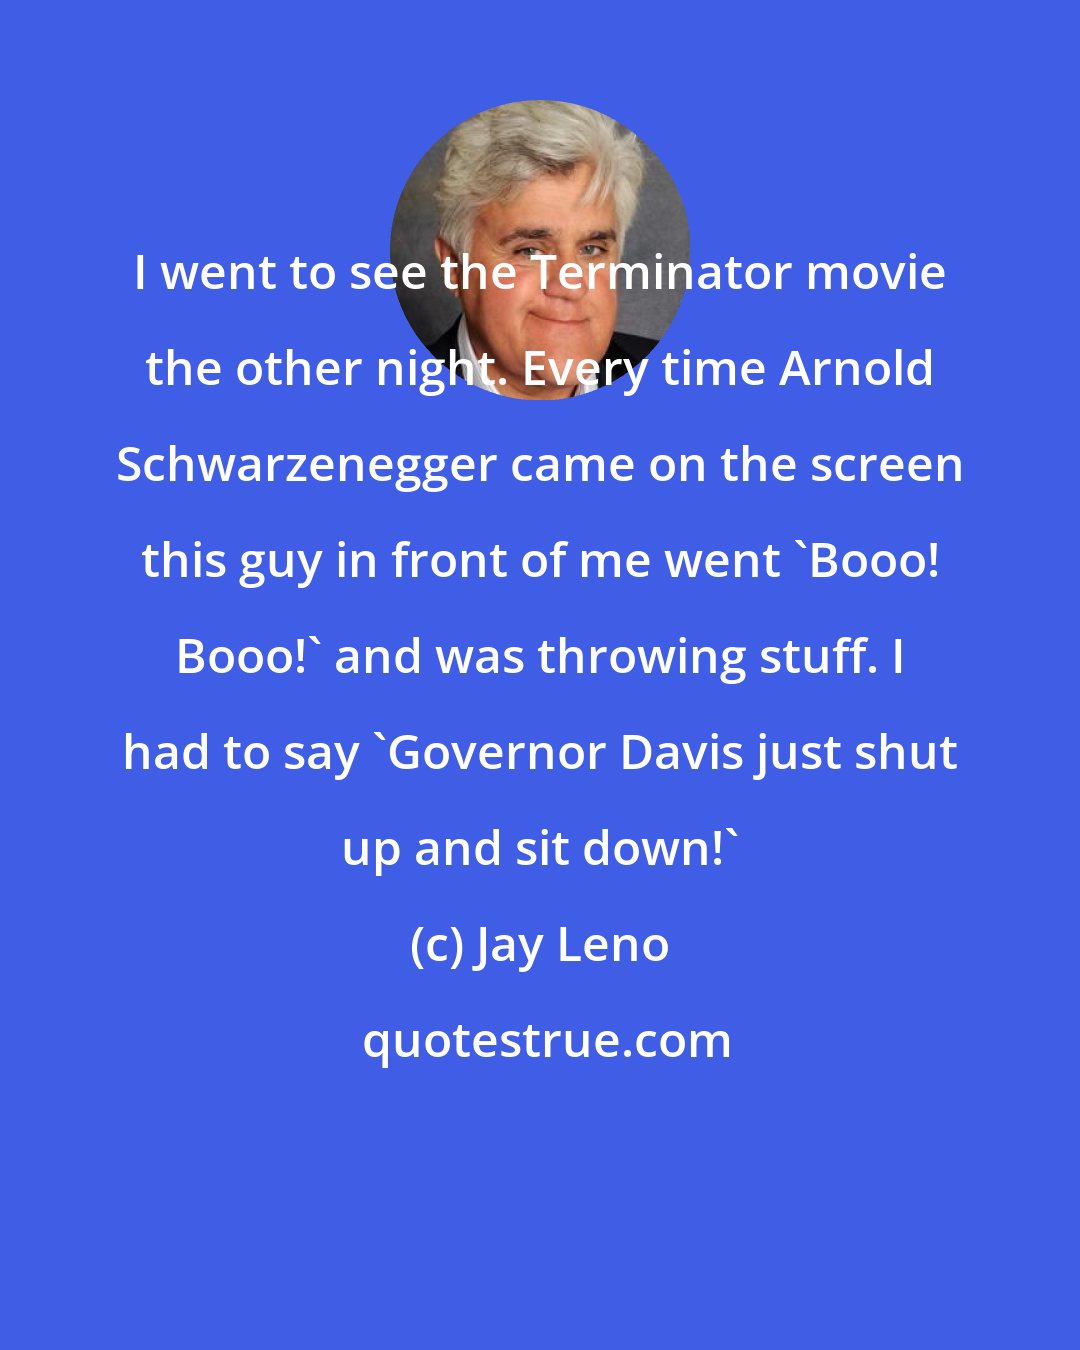 Jay Leno: I went to see the Terminator movie the other night. Every time Arnold Schwarzenegger came on the screen this guy in front of me went 'Booo! Booo!' and was throwing stuff. I had to say 'Governor Davis just shut up and sit down!'